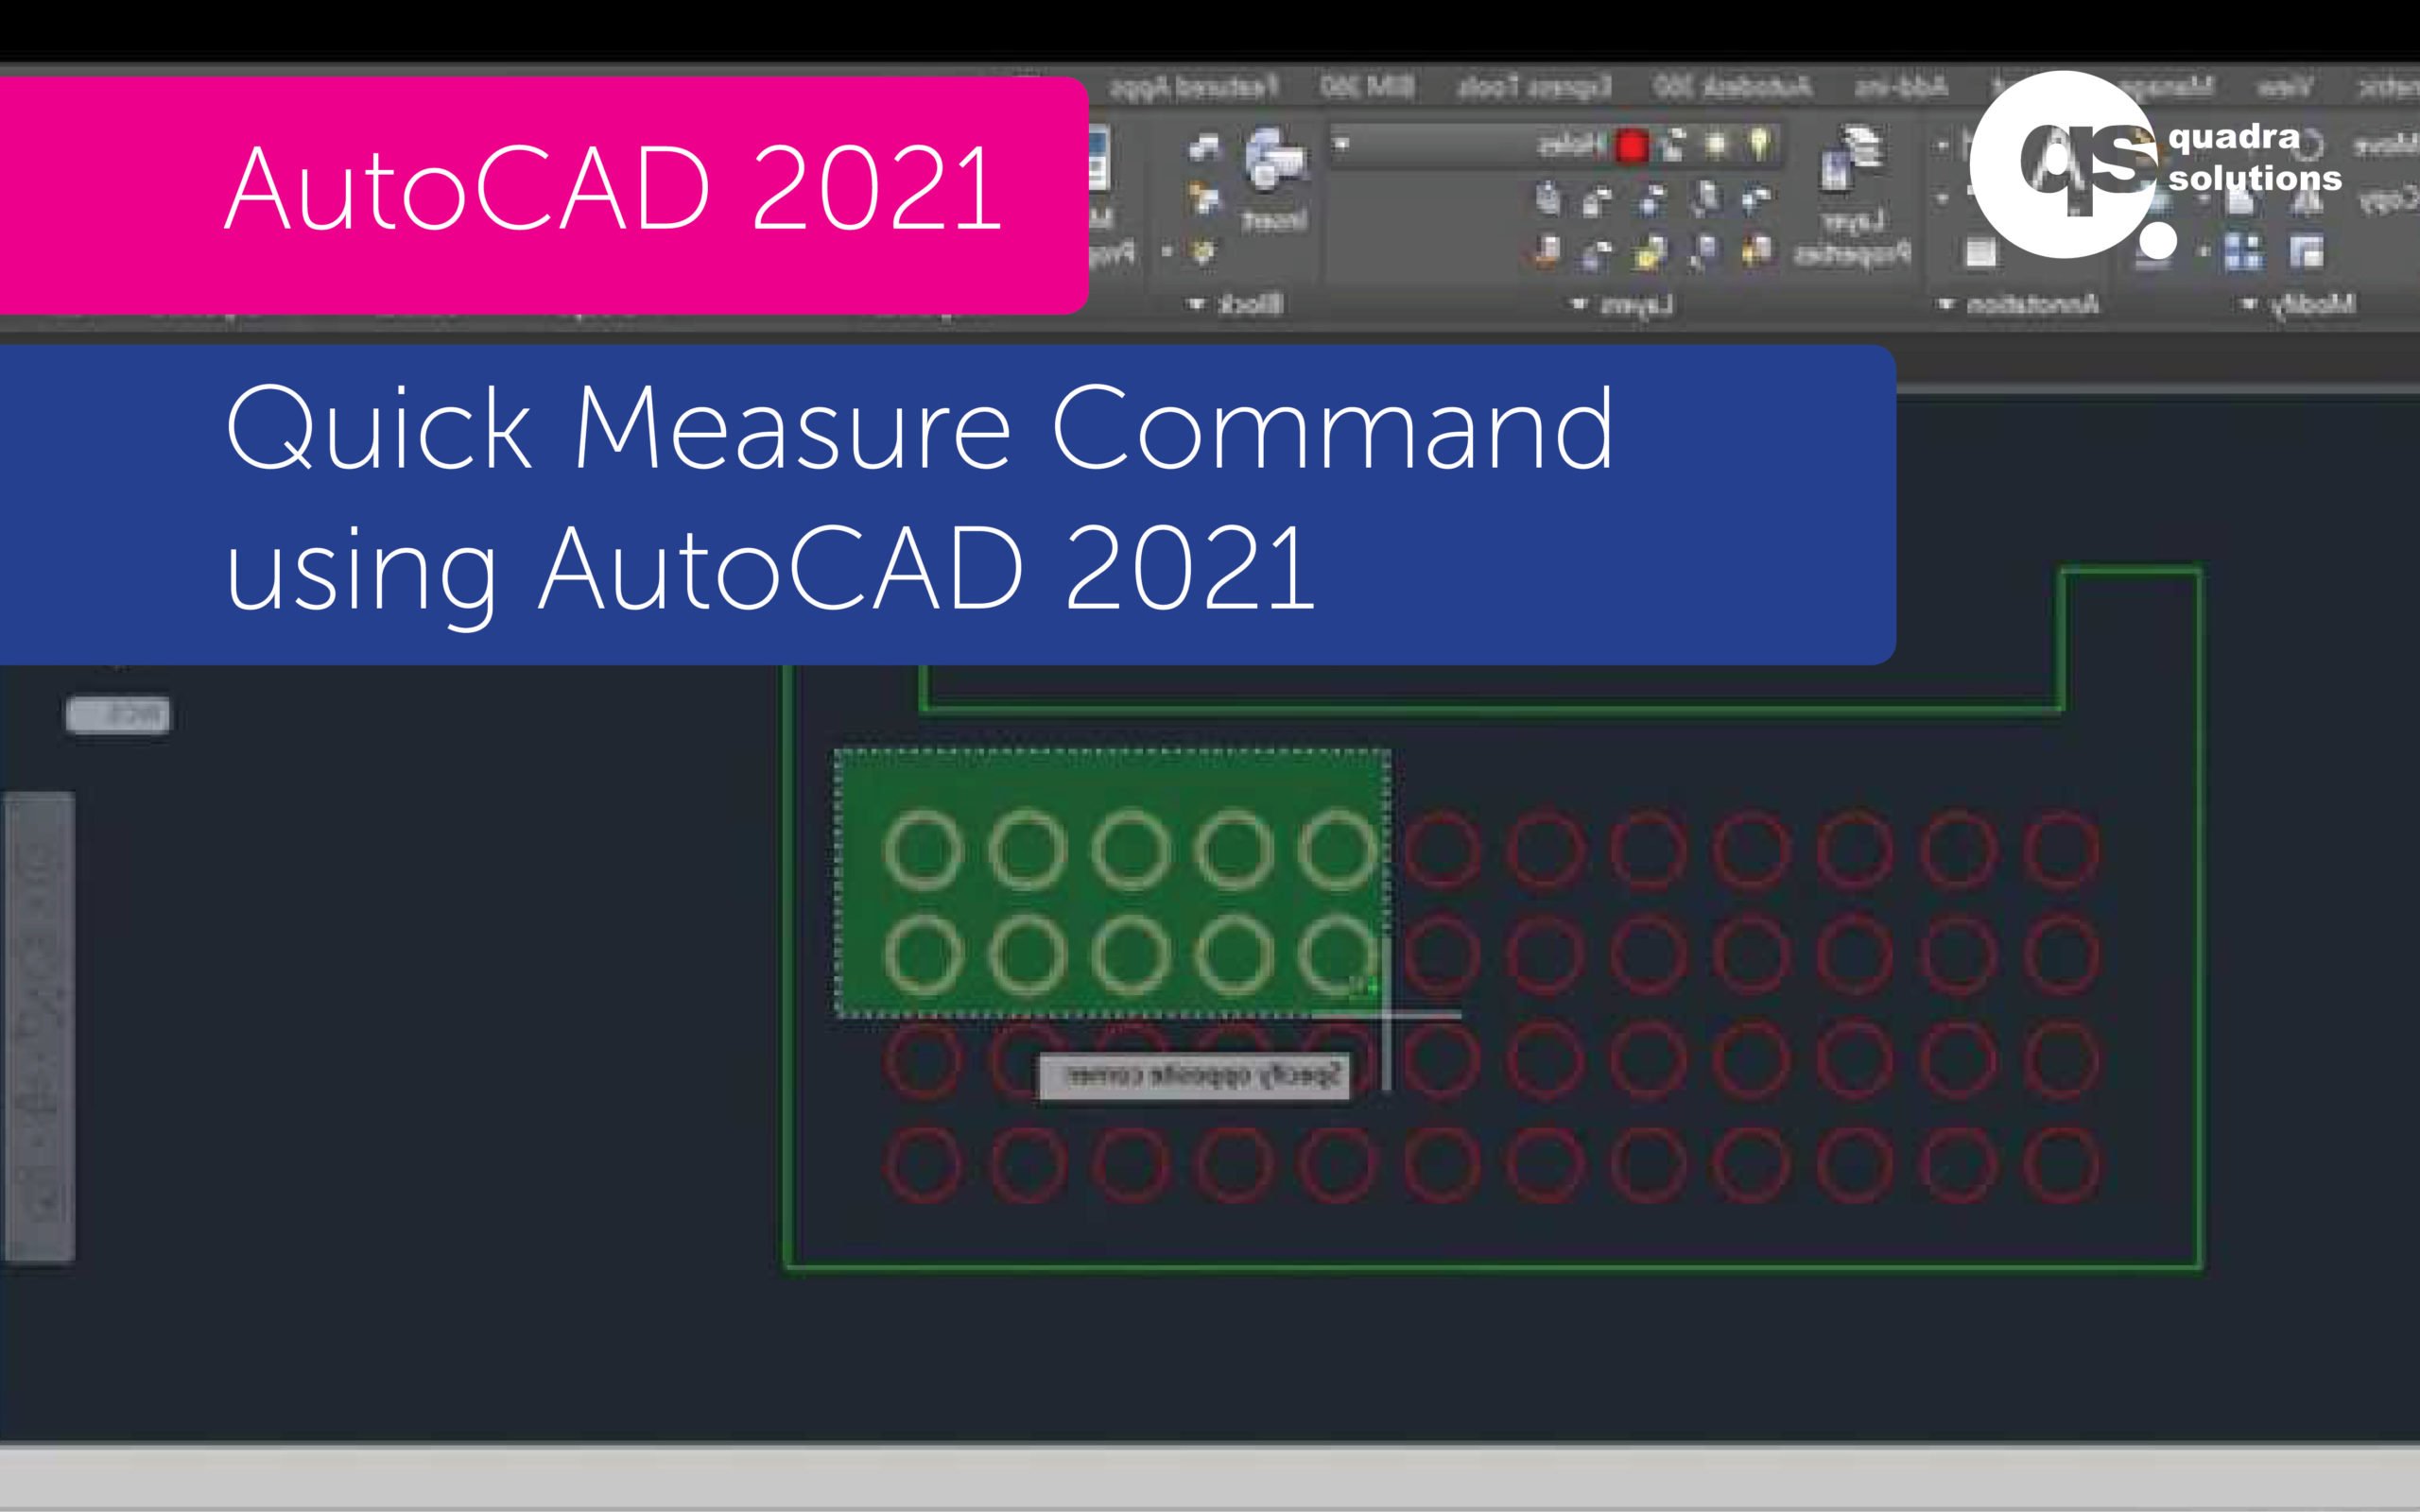 What’s new for AutoCAD 2021 – Quick Measure Command